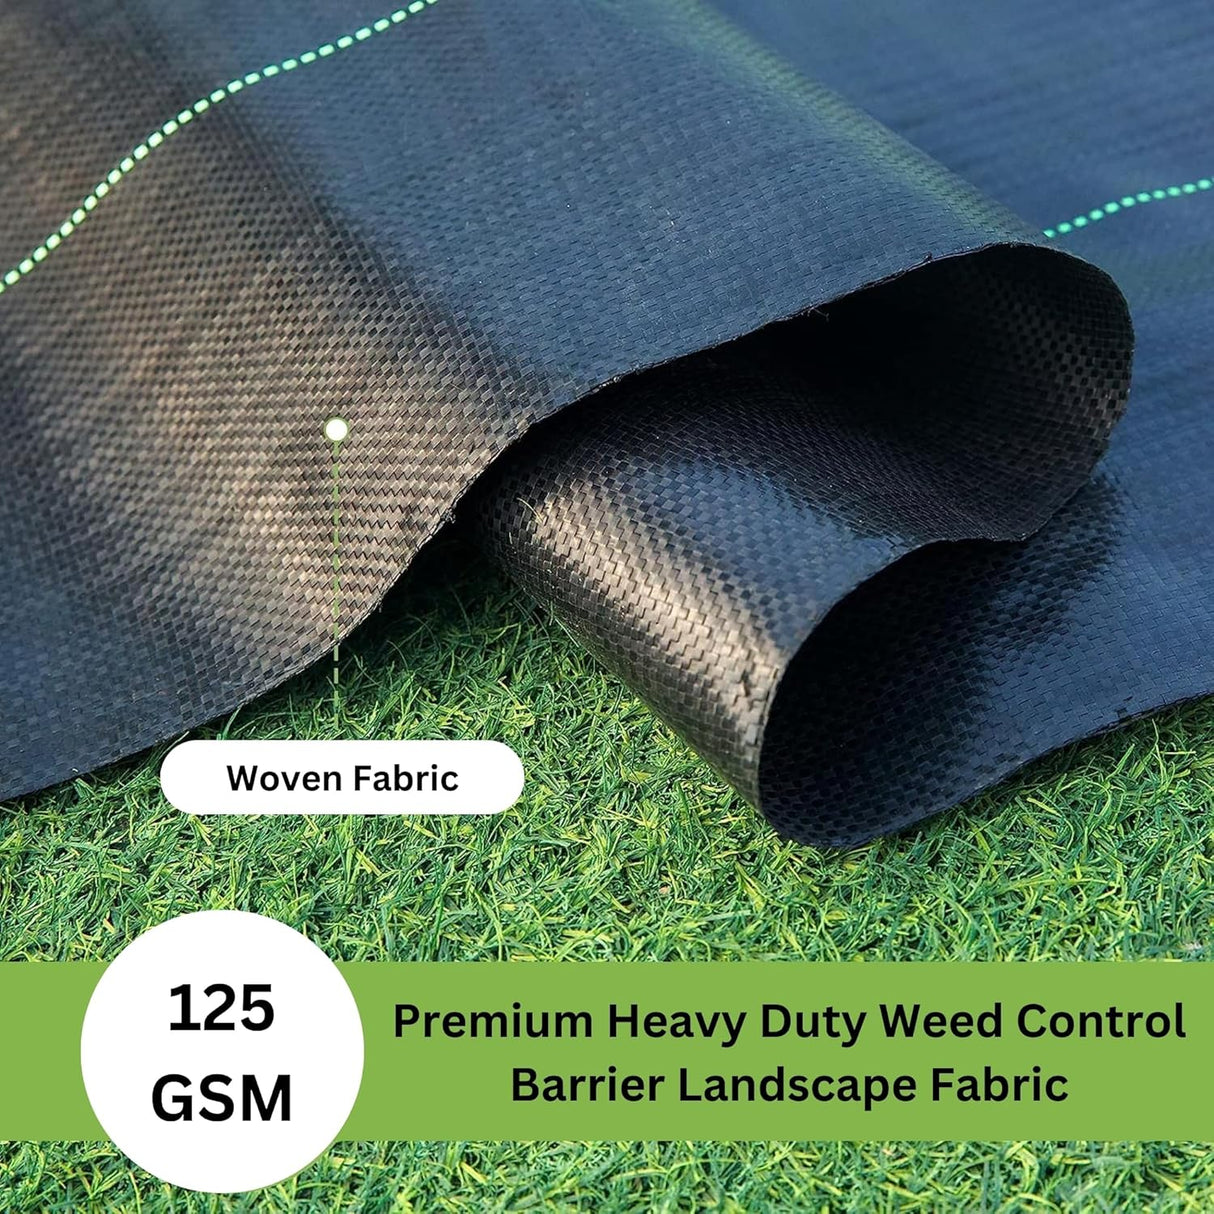 Singhal Garden Weed Control Mat Heavy Duty 125 GSM Landscape Fabric, Weed Block Gardening Mat Eco-Friendly Weed Control Bed Gardening Mat (1 x 15 Meter, Black)